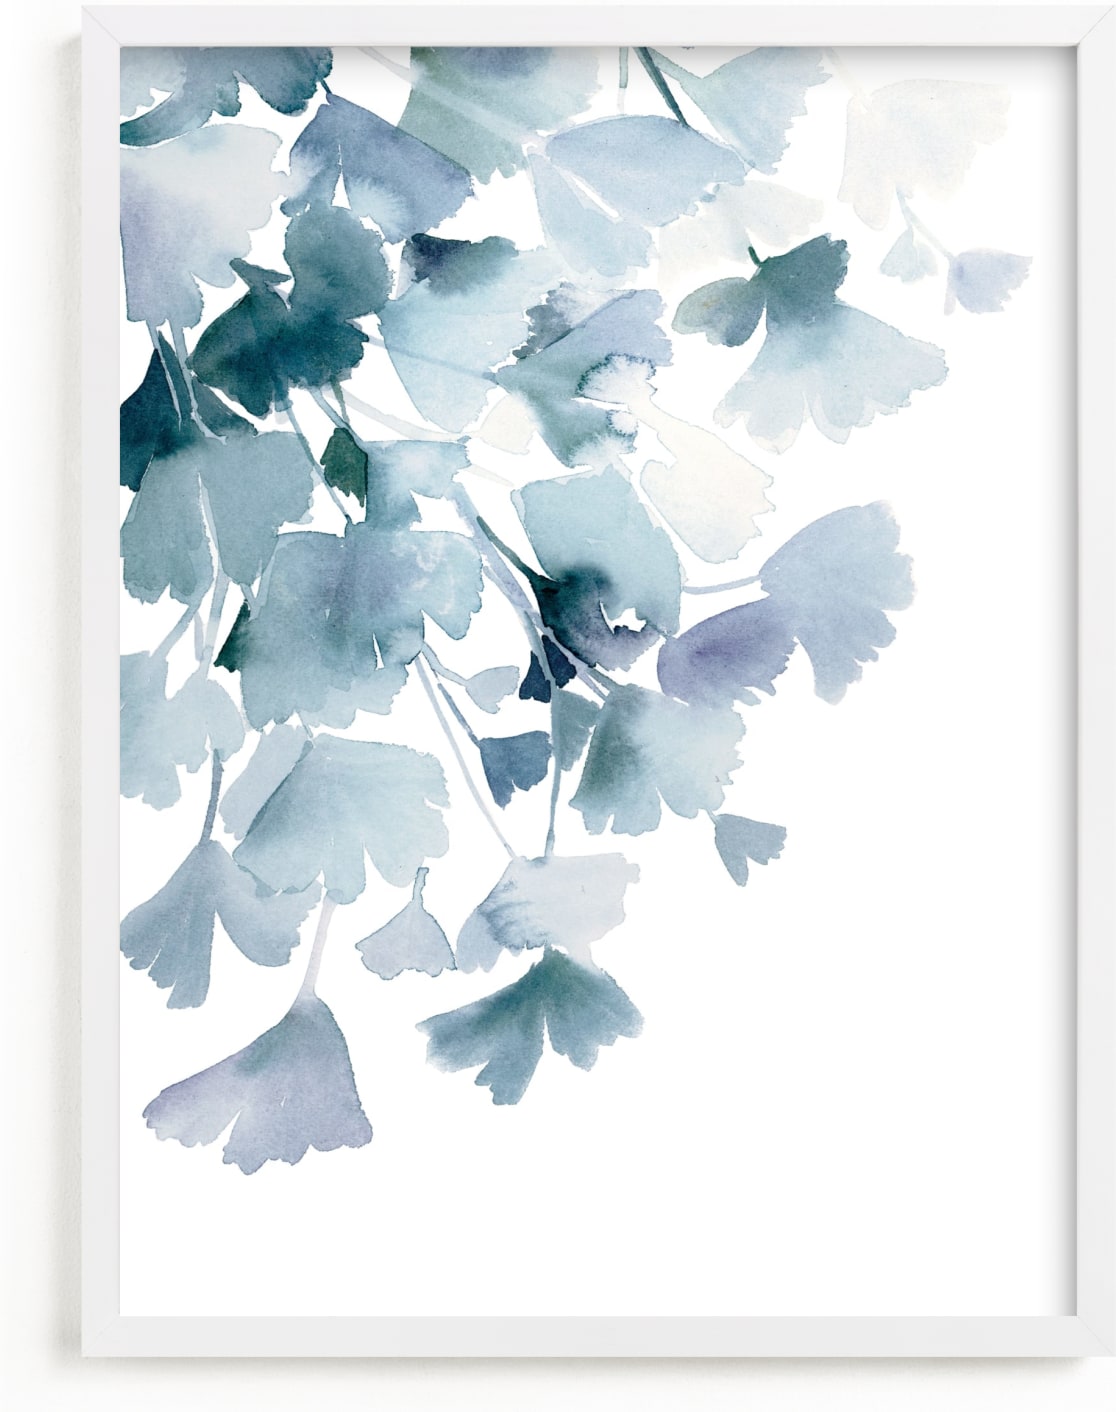 This is a blue art by Yao Cheng Design called Blue Ginkgo.